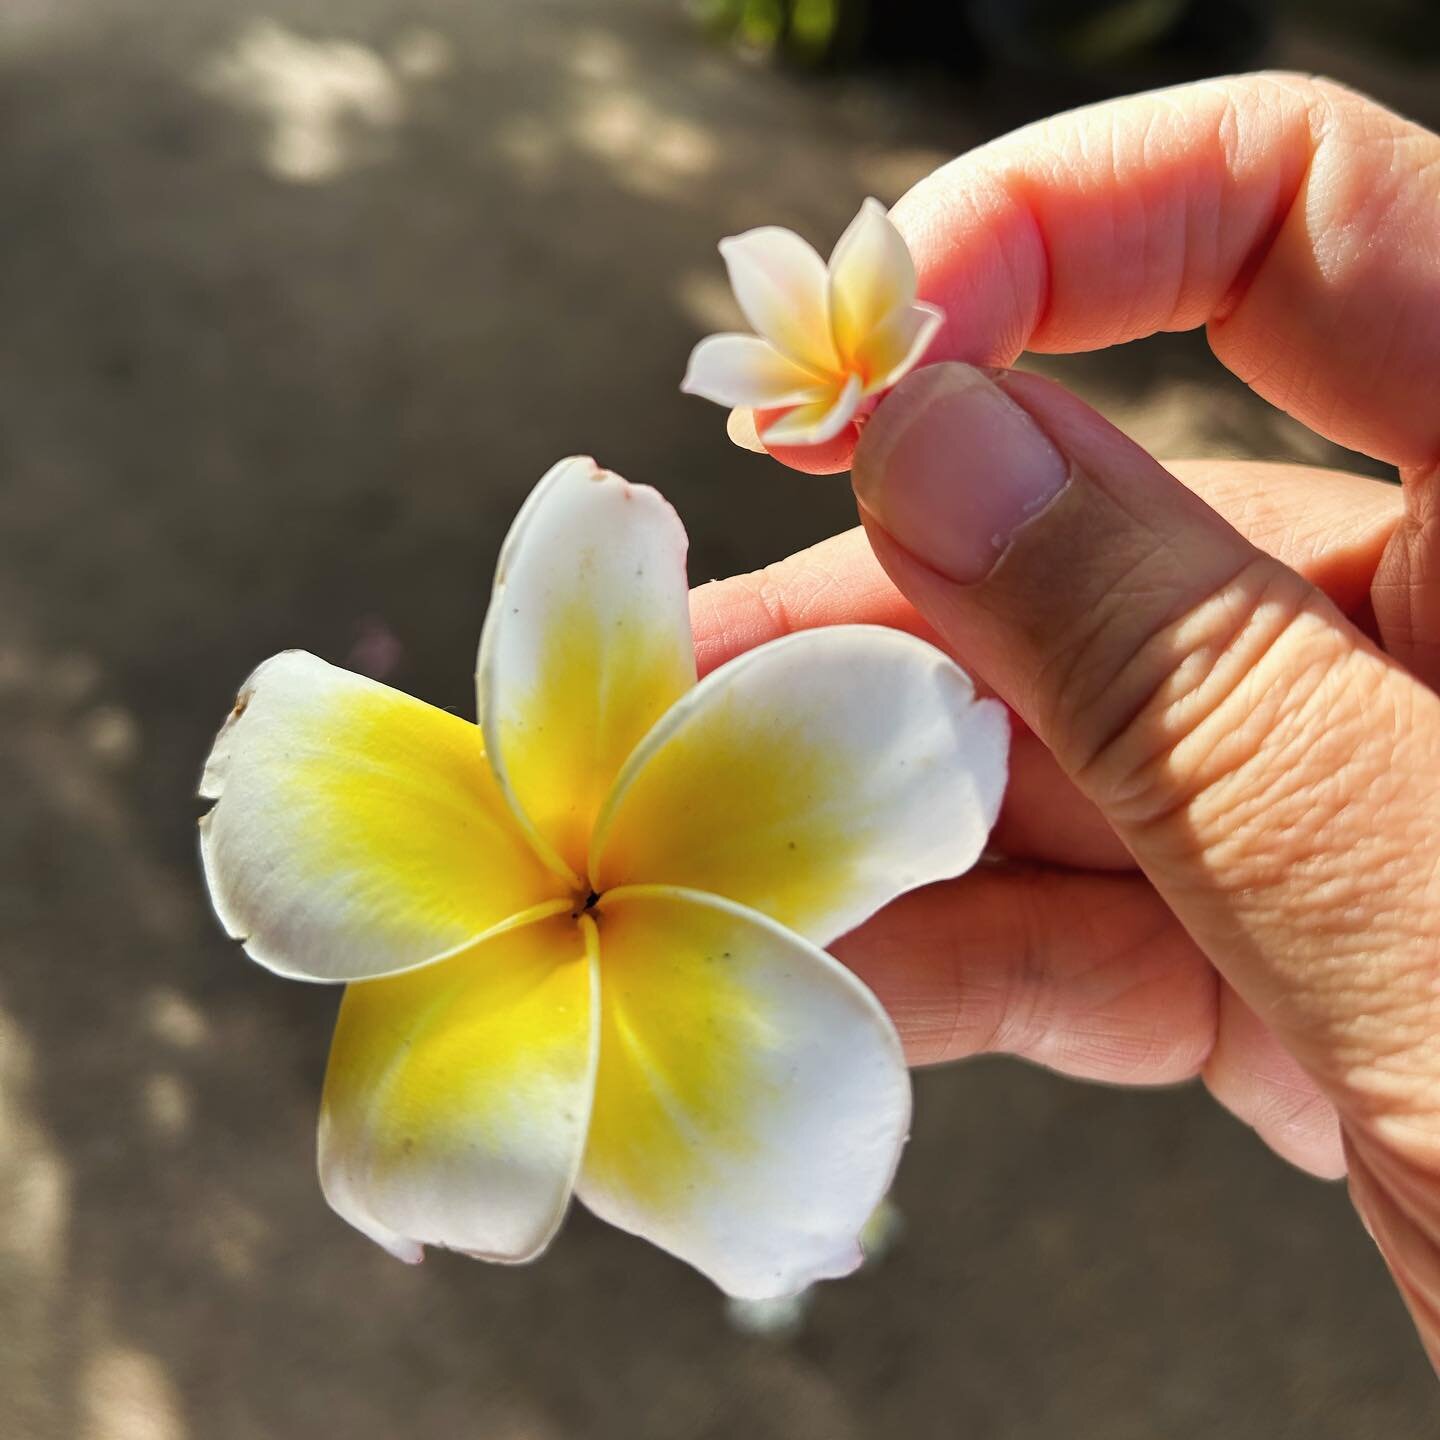 What flower reminds you of Bali?

From my first day in Bali over 23 years ago, the intoxicating sweet scent of Frangipani would welcome me back to this island paradise. 

Since then, I&rsquo;m always bending down down to pick a bloom off the ground o